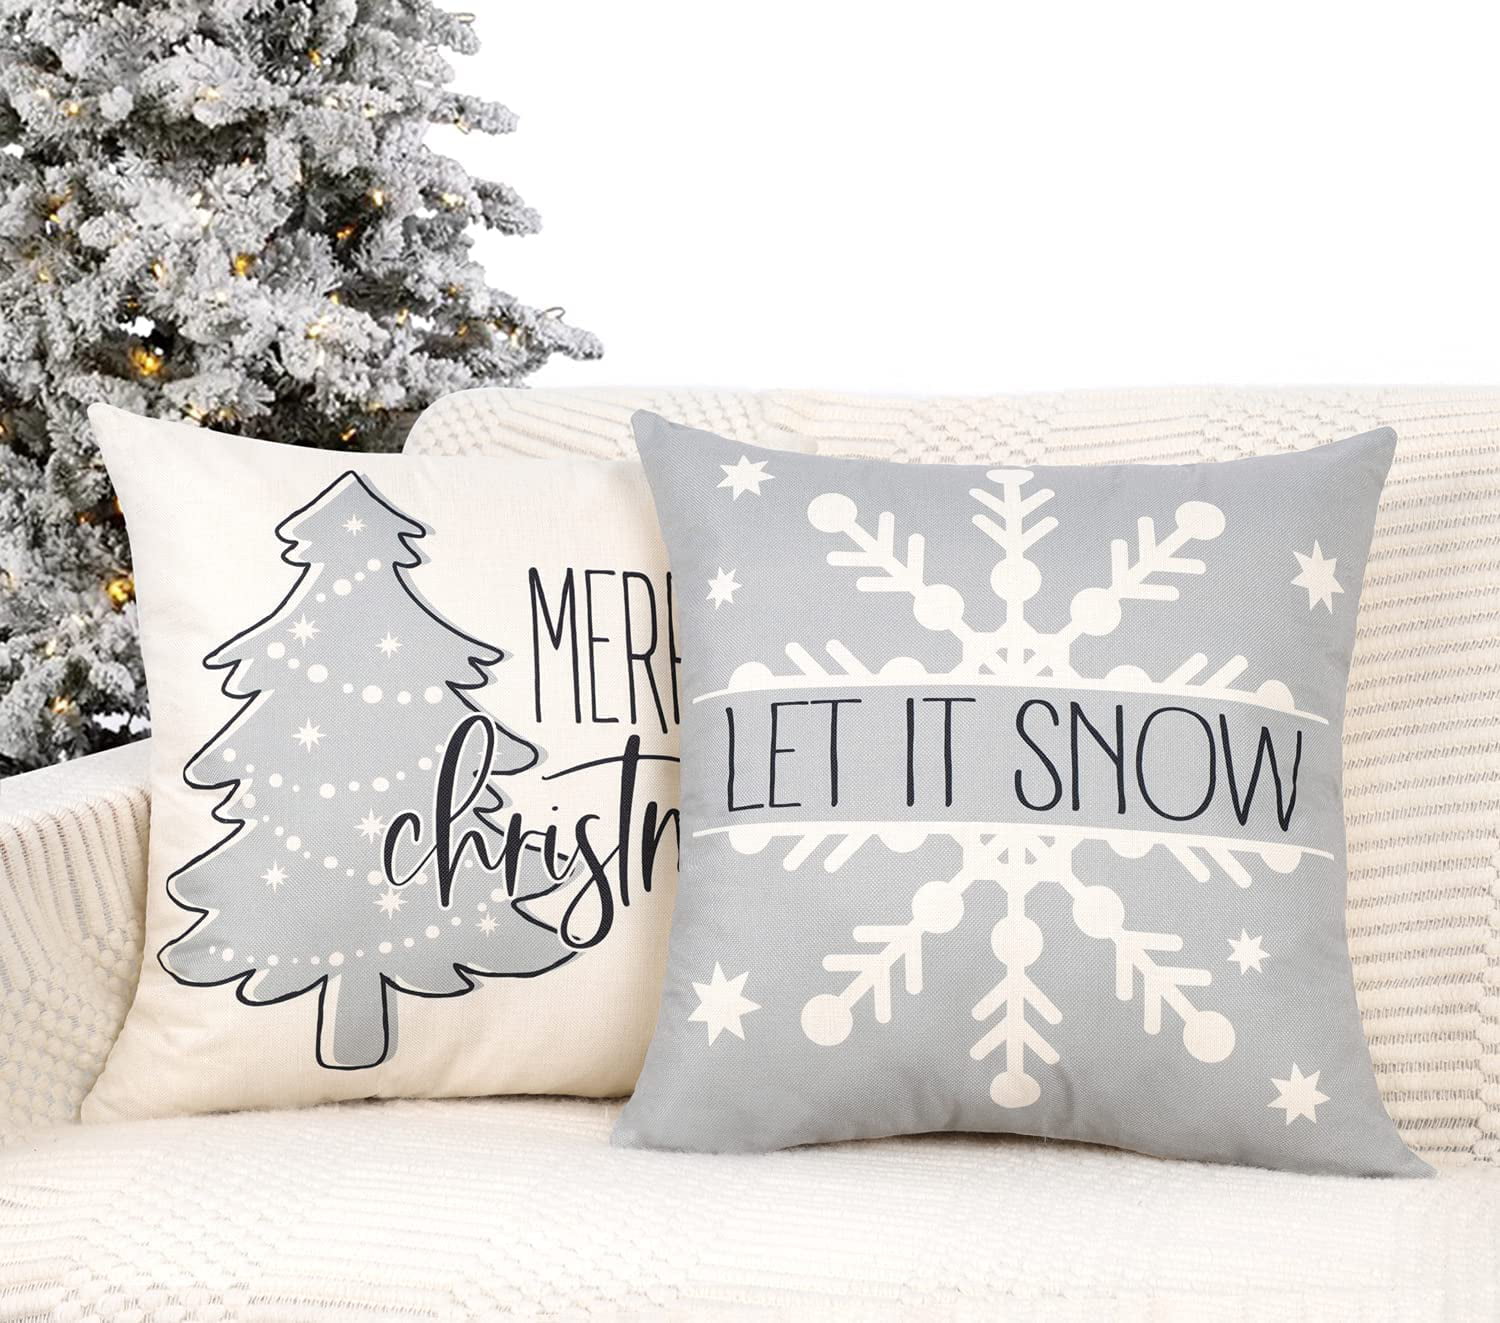  SHANLUO Christmas Decorations Throw Pillow Covers 18x18 Sofa  Decor Clearance Outdoor Pillowcases Farmhouse Set of 2 for Couch, Lumbar,  Bed, Living Room Soft Decorative de Navidad Casa White Red : Home